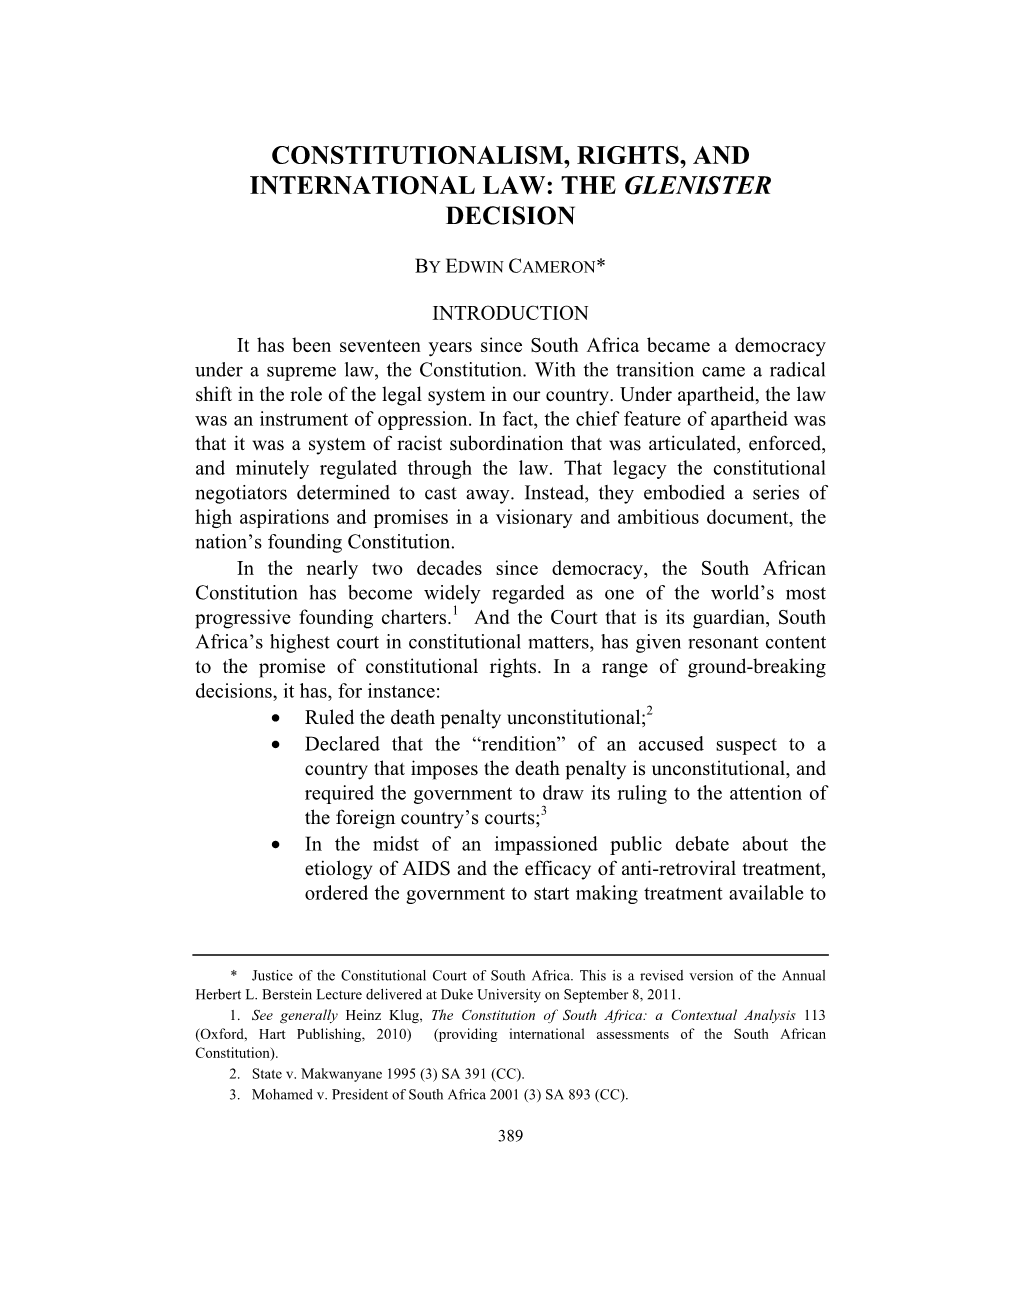 Constitutionalism, Rights, and International Law: the Glenister Decision